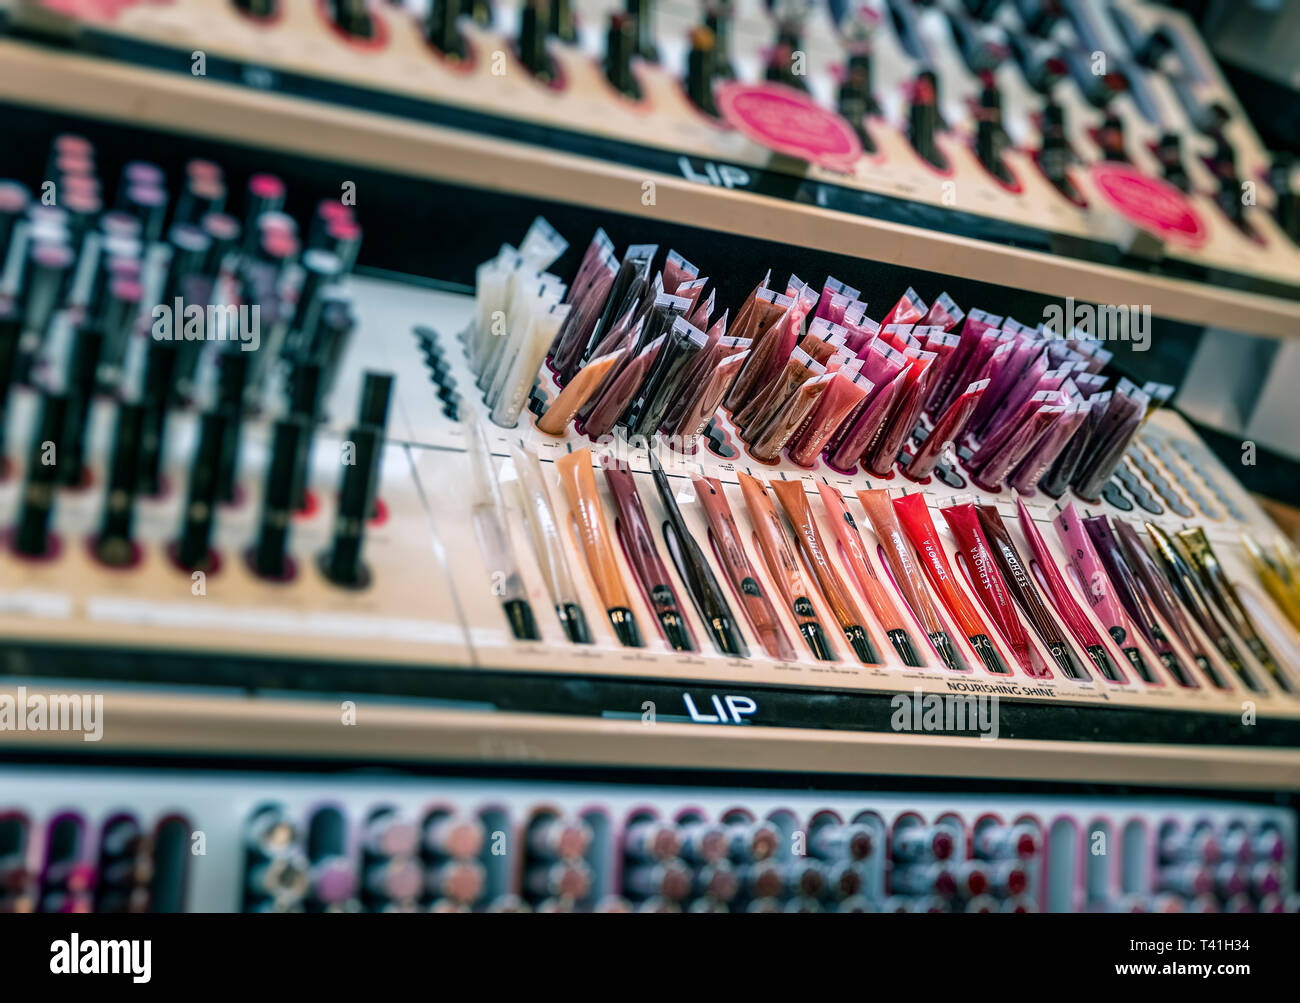 Lip gloss display in a Sephora personal care and beauty store. Stock Photo